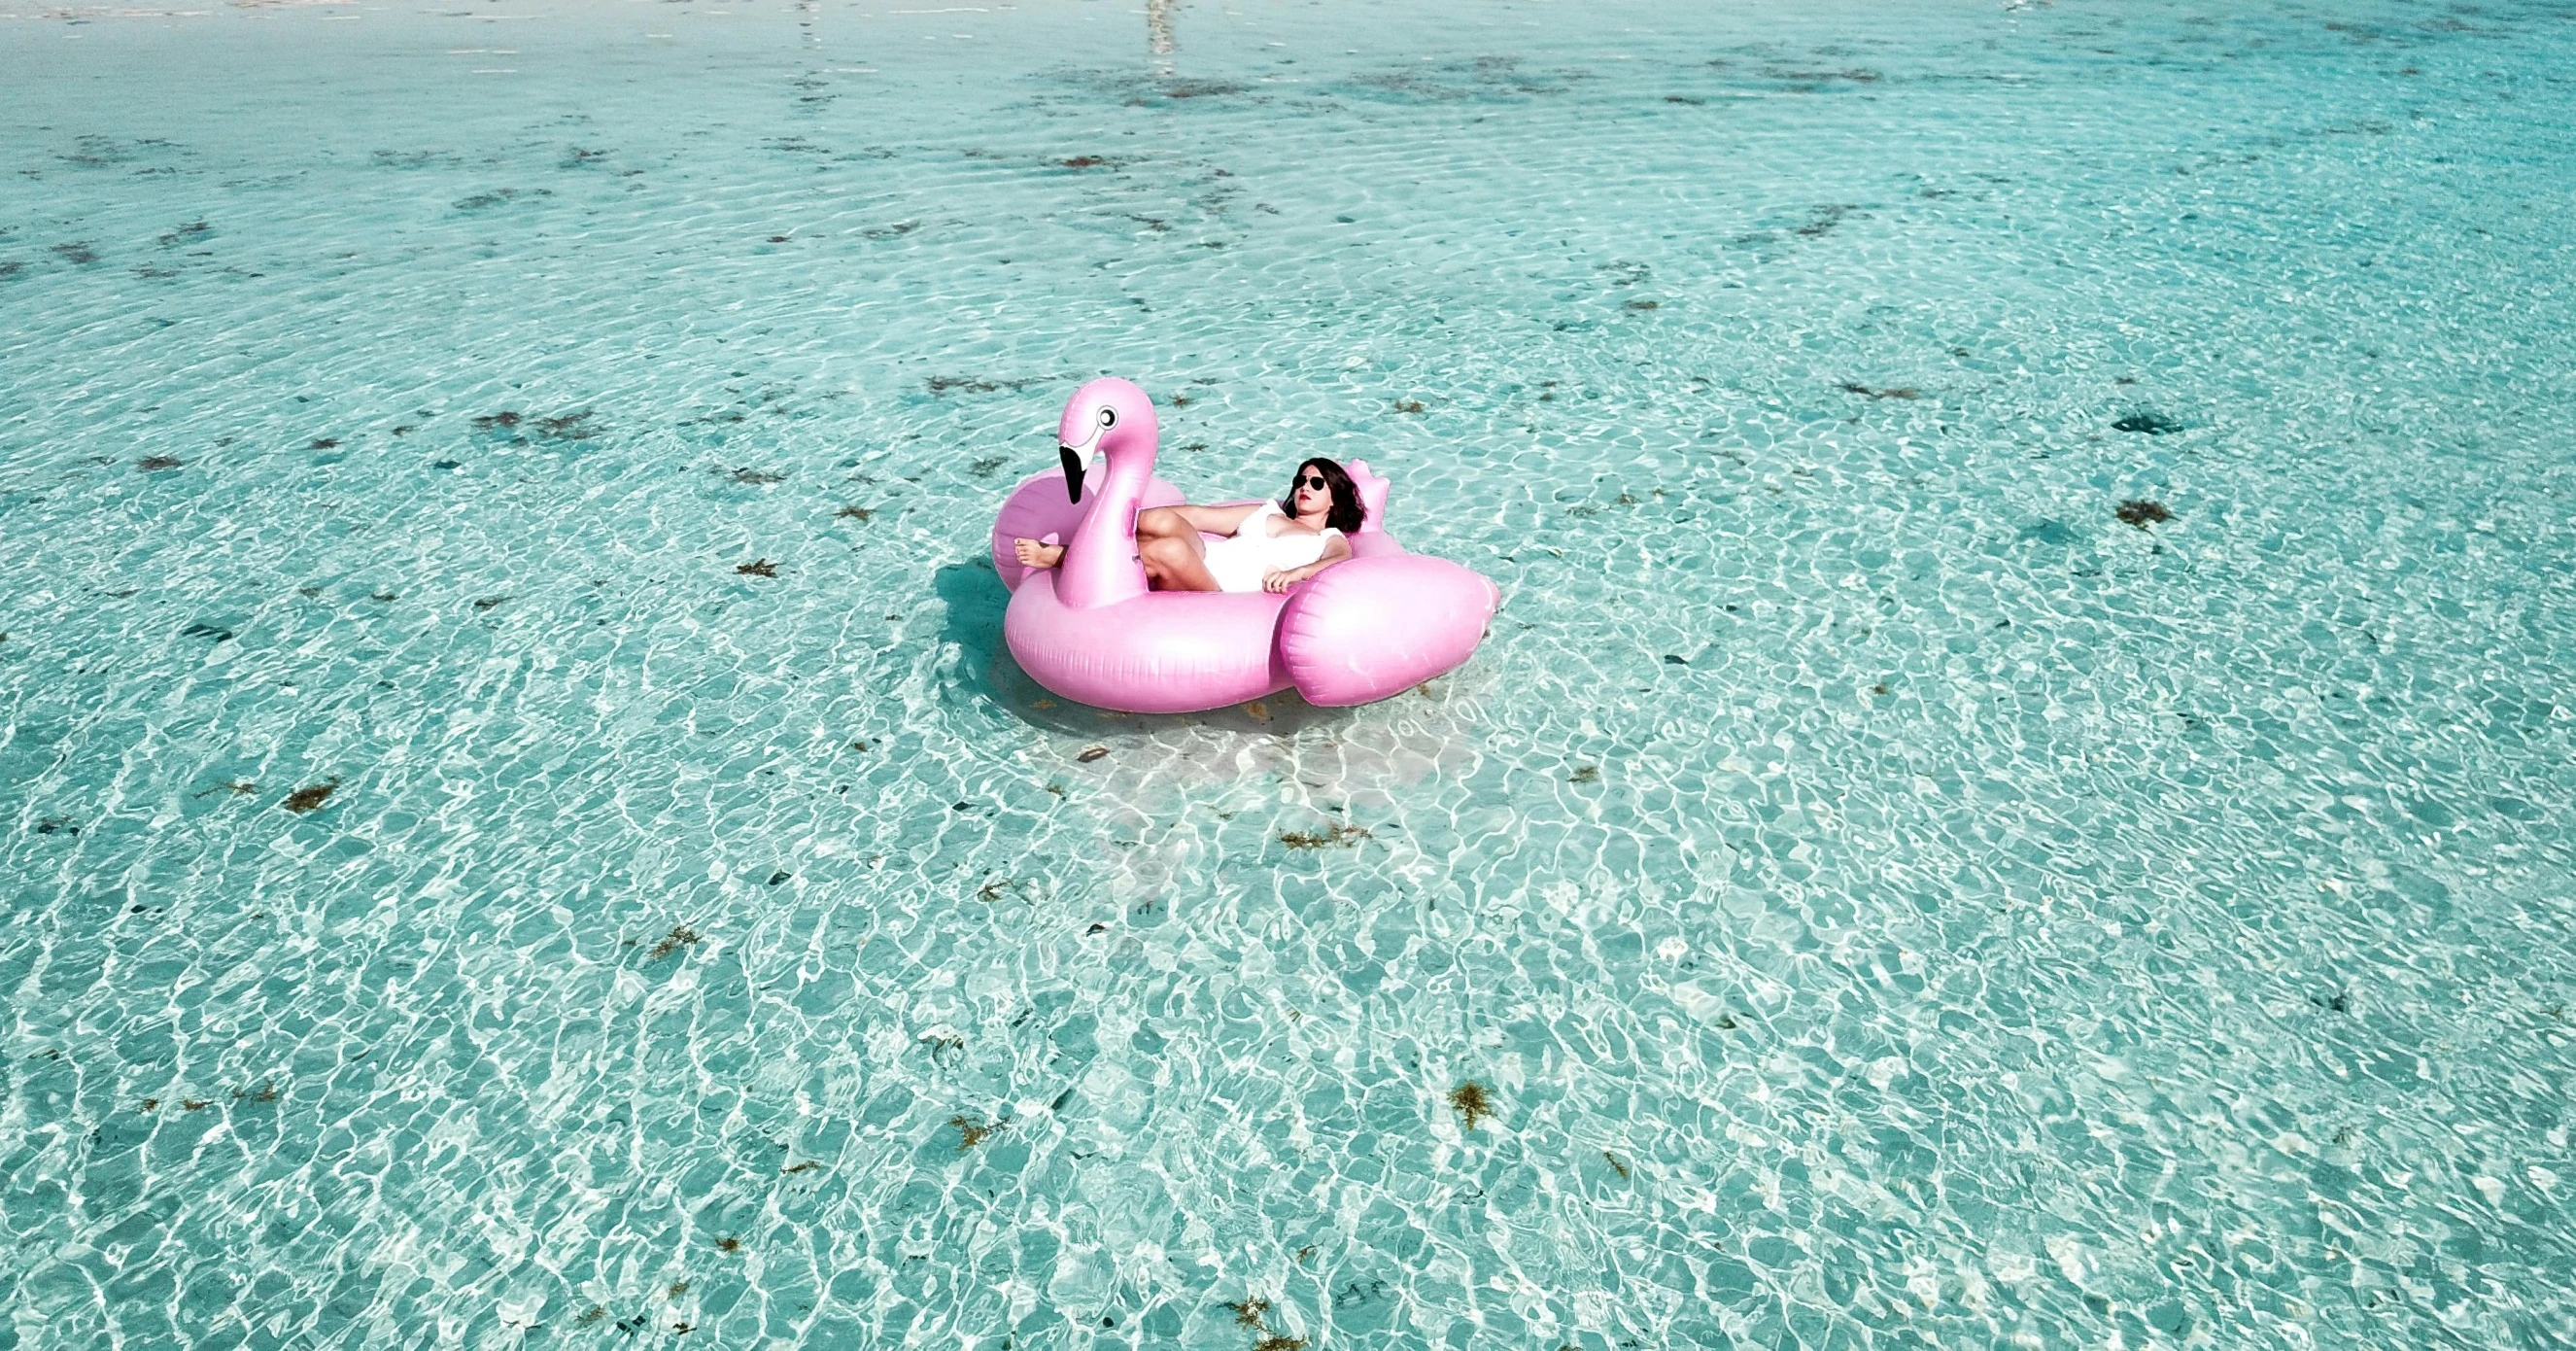 a couple of people floating on top of a pink inflatable, pexels contest winner, bahamas, flamingo, tiffany dover, floating alone